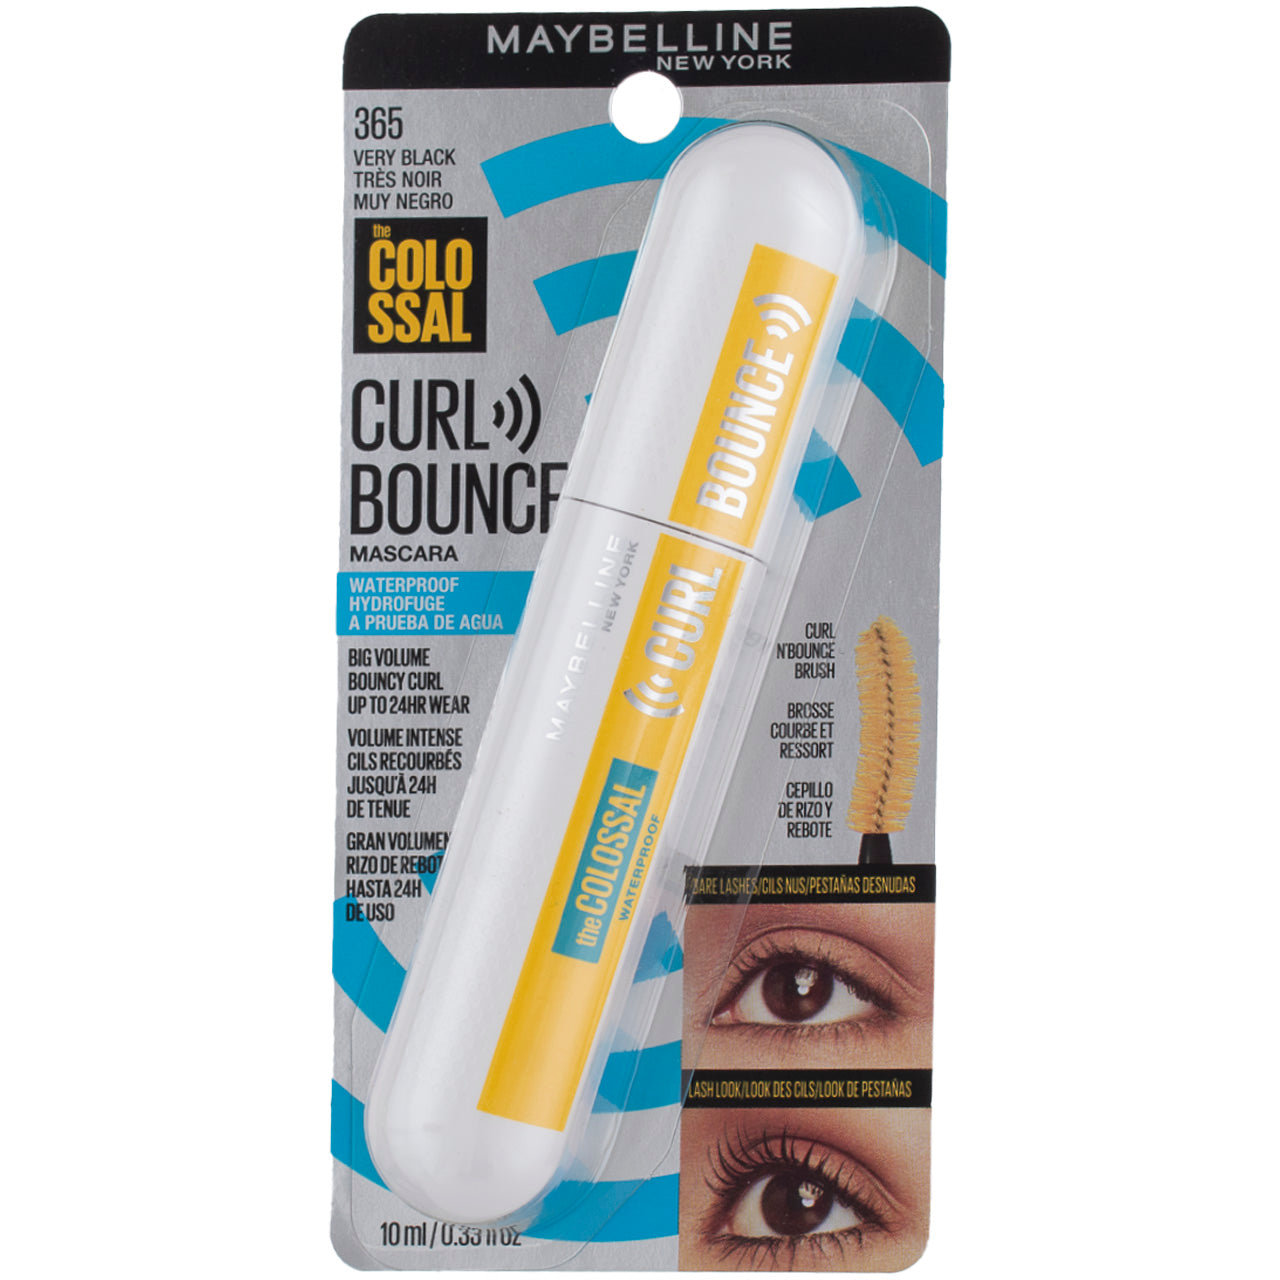 Maybelline The Colossal Curl Bouncing 0.33 fl – Mascara, 365, Vitabox Very Black